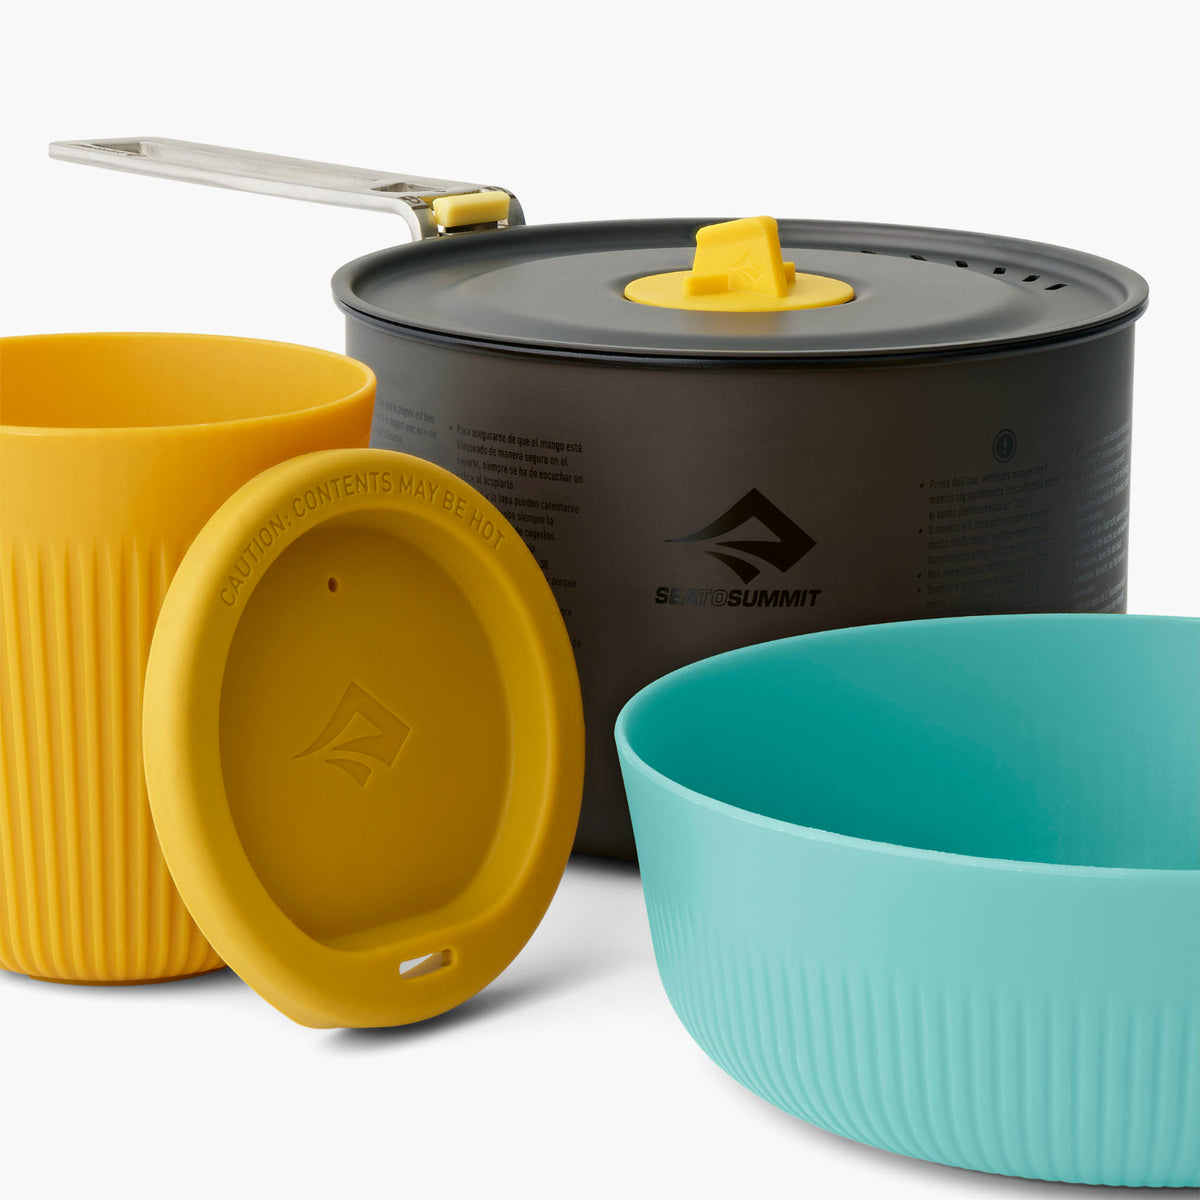 Sea to Summit Frontier Ultralight One Pot Cook Set (1 Person, Small 3 Piece)